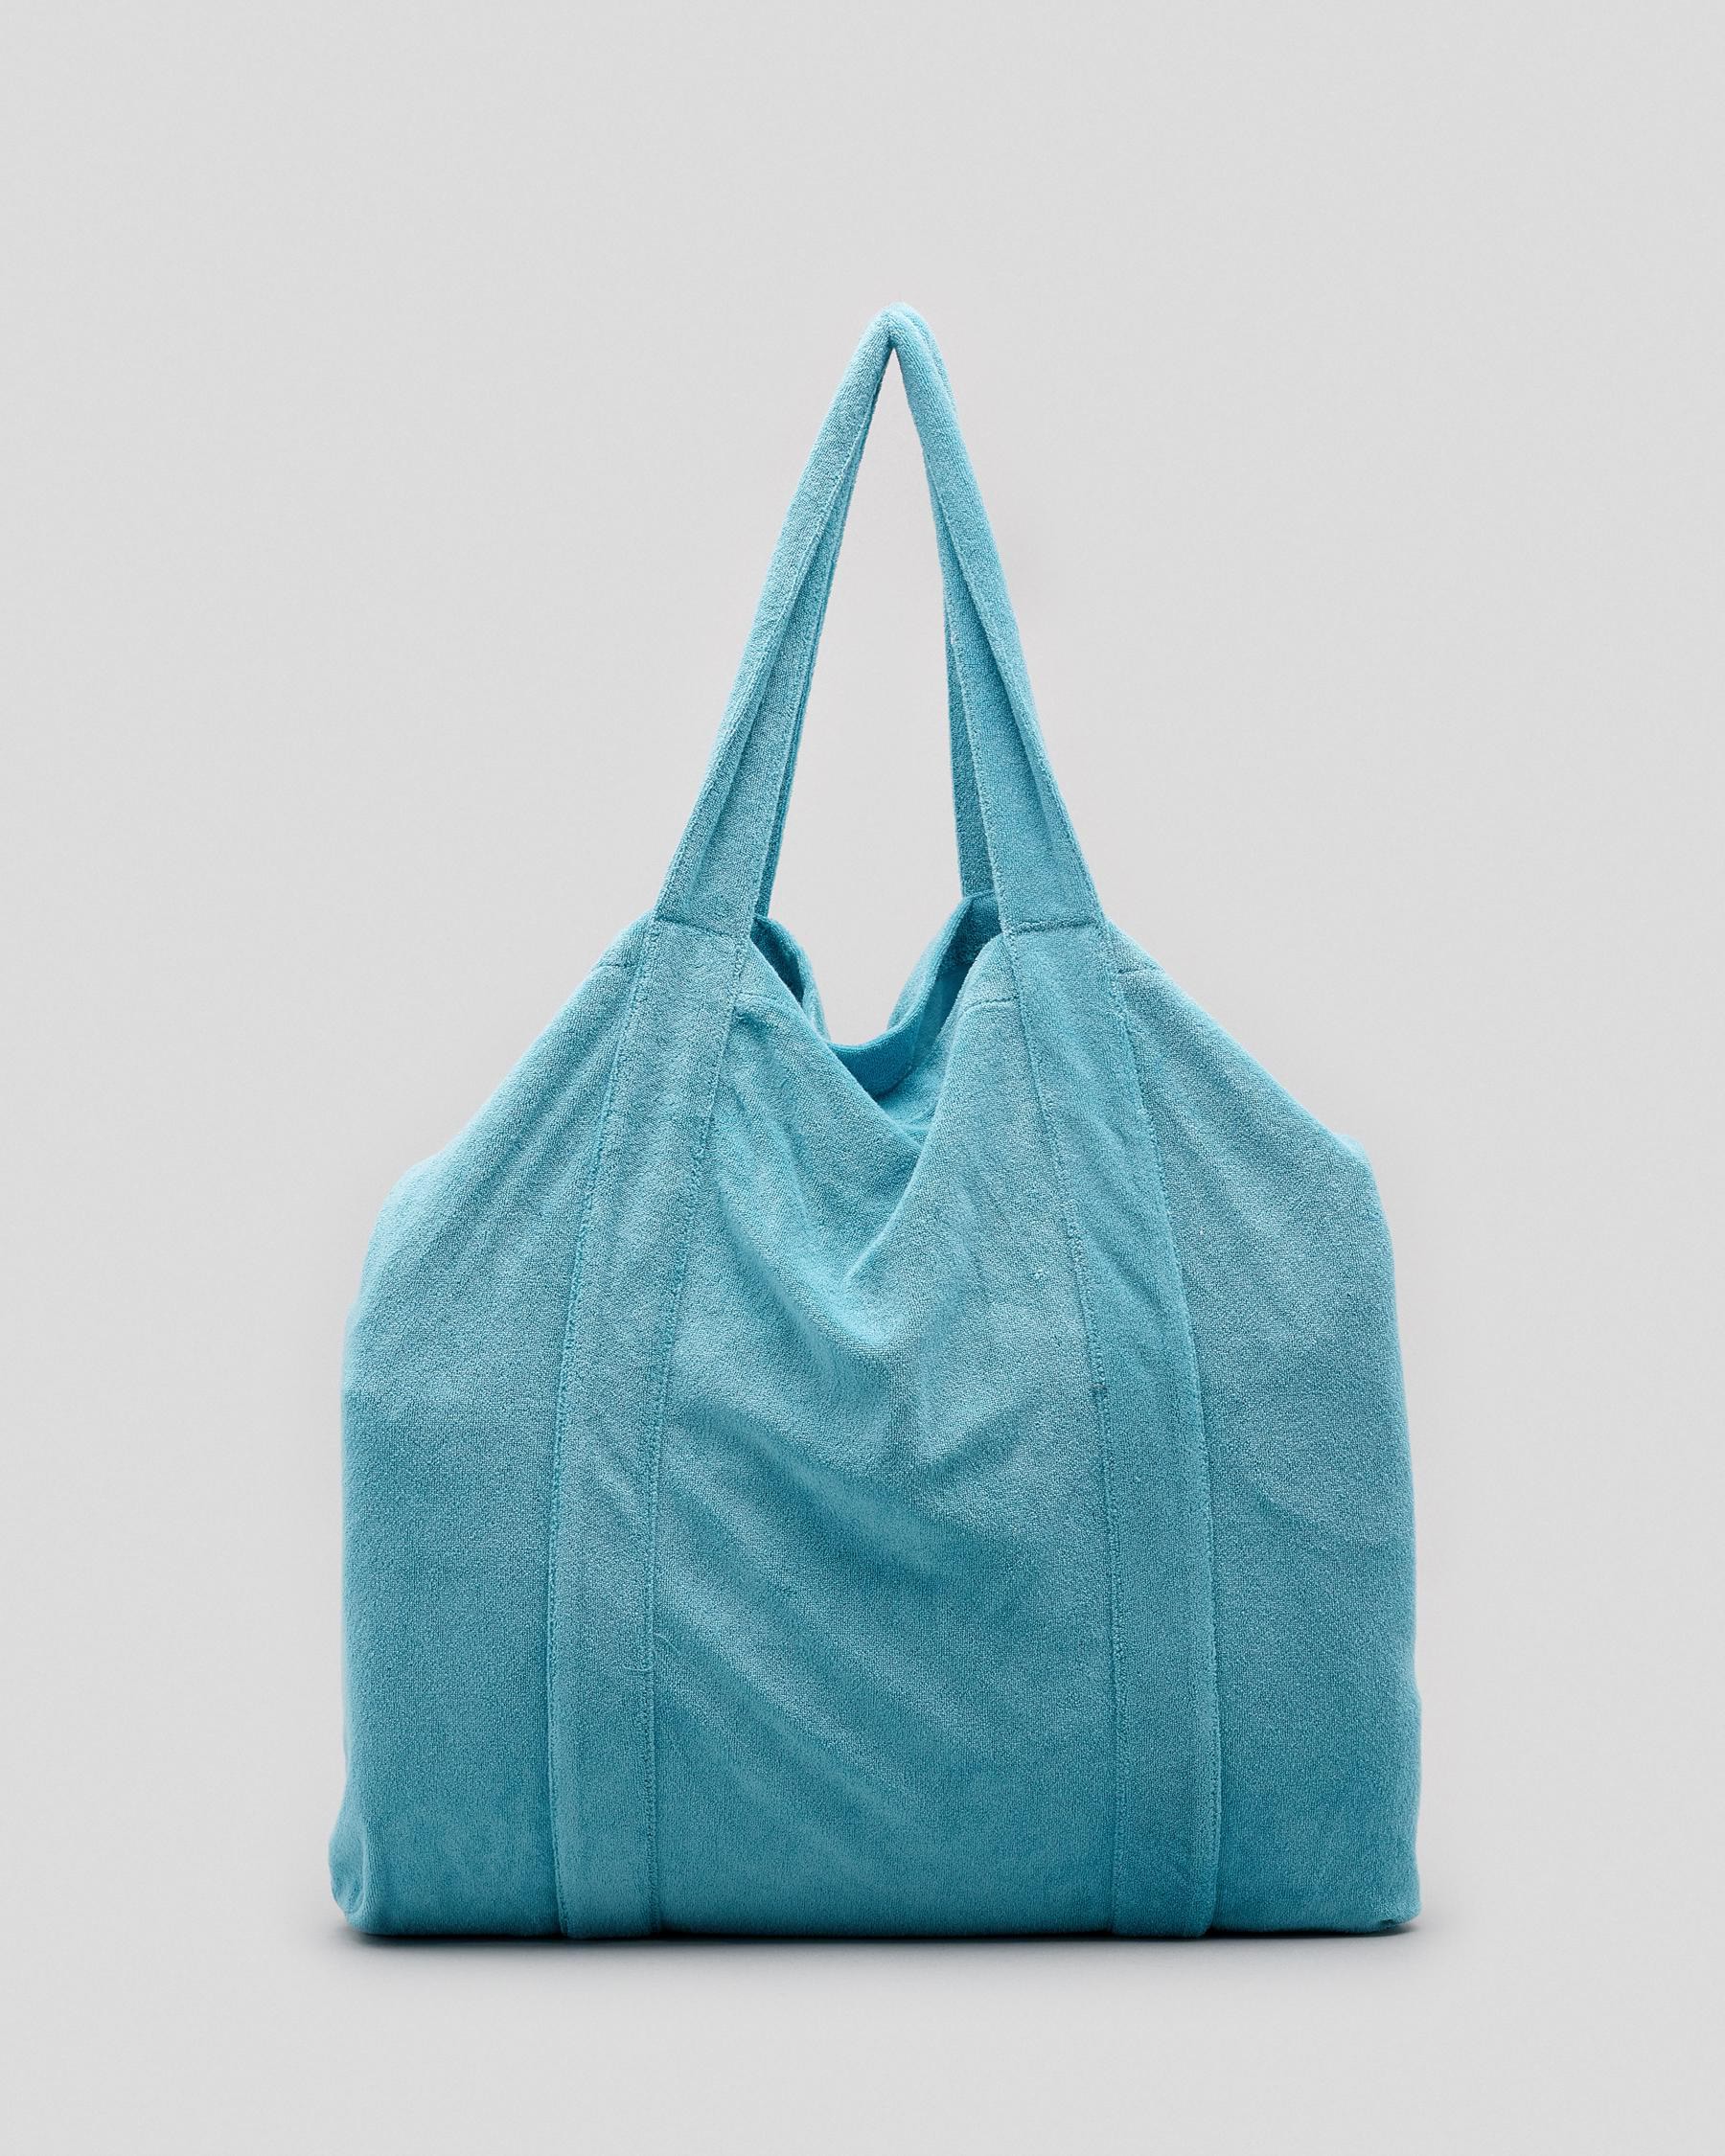 Hurley Terry Beach Bag In Hltel - Light Teal - FREE* Shipping & Easy ...